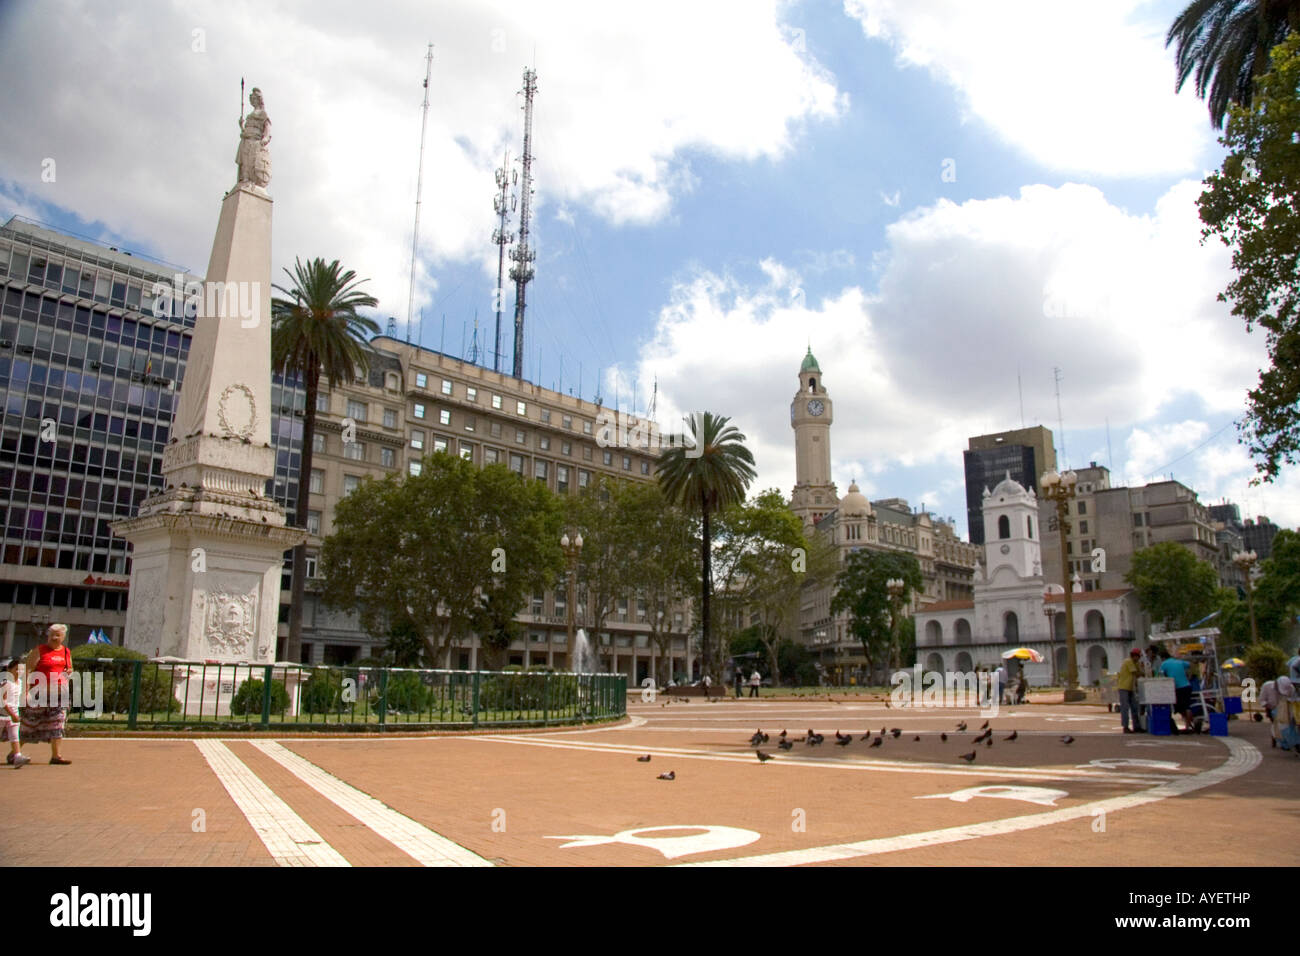 The Piramide de Mayo national monument and the Cabildo located in the Plaza de Mayo in Buenos Aires Argentina Stock Photo